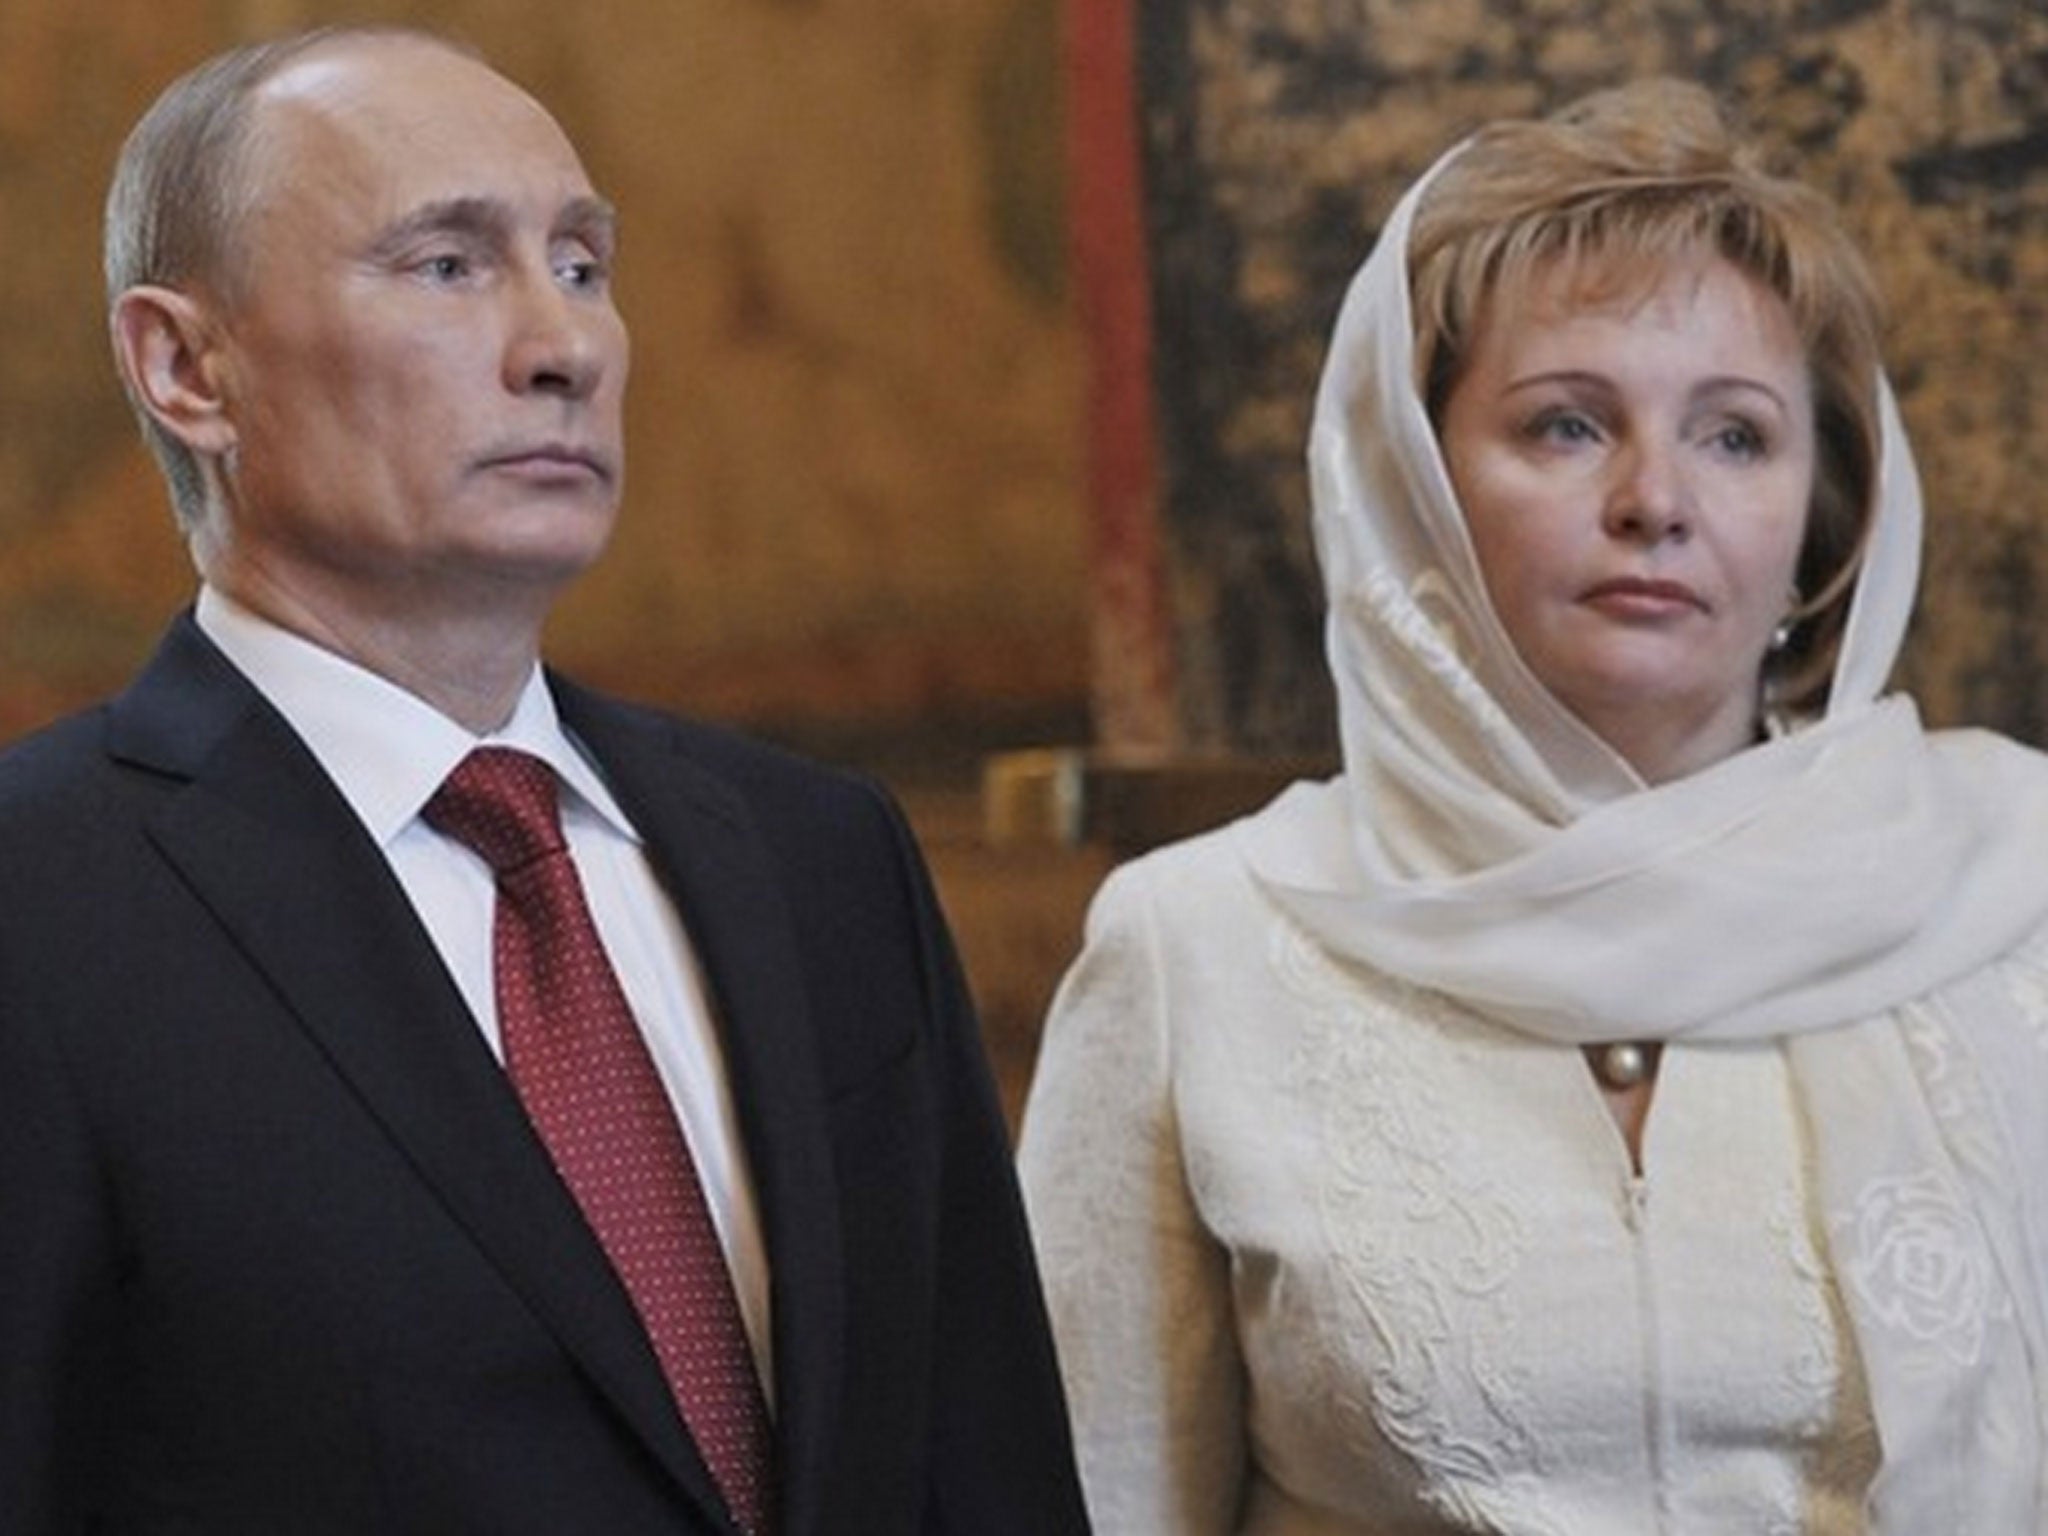 Russia’s President Vladimir Putin and Ludmila have divorced